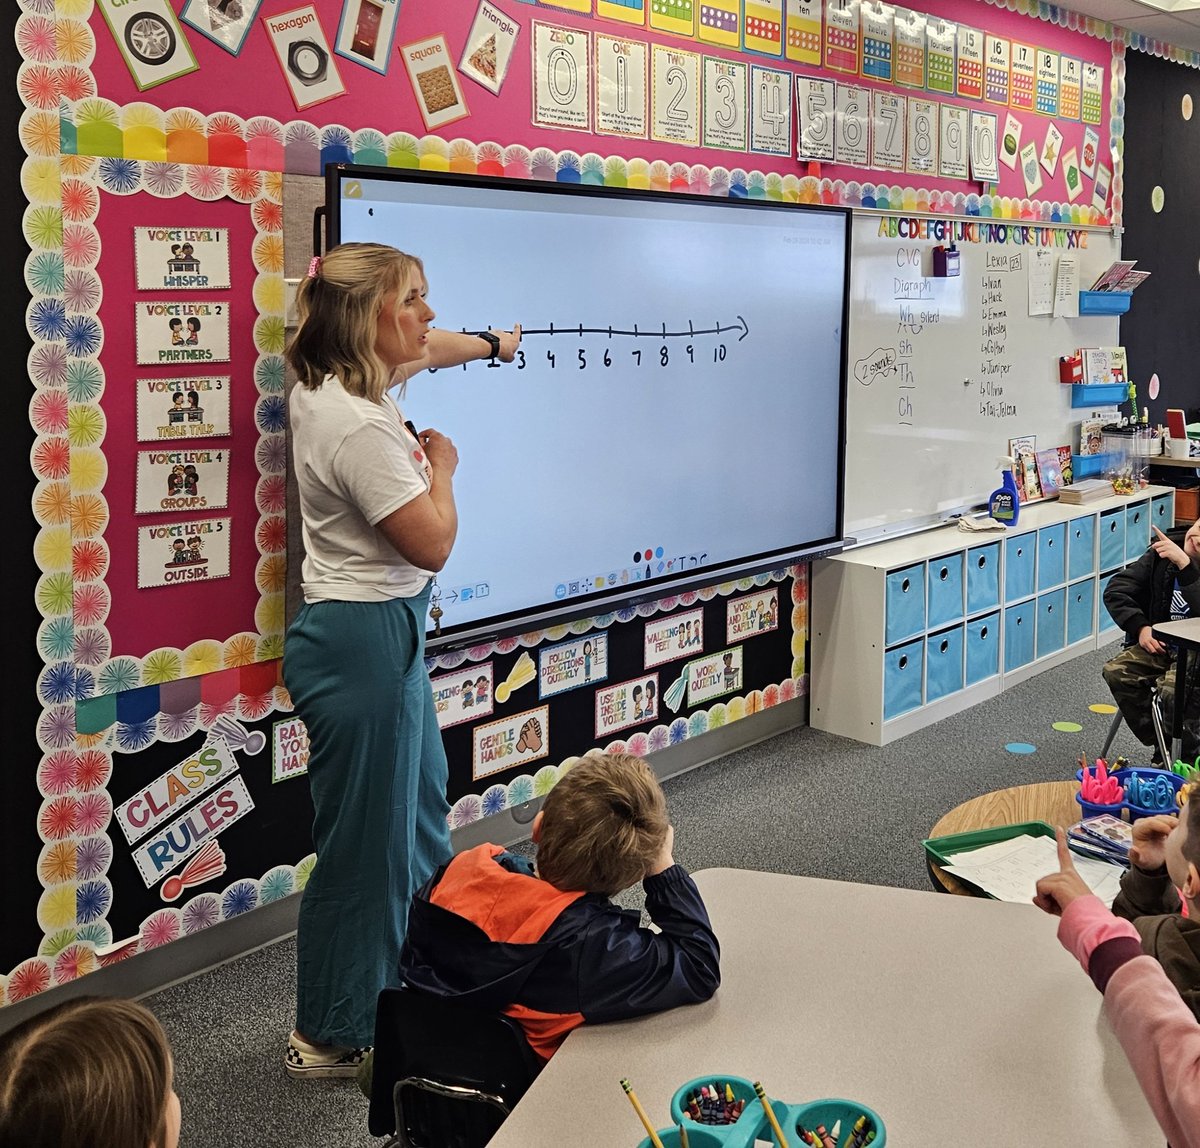 Had the opportunity to co-teach with Miss Duerksen in her kindergarten class @Nampa131schools yesterday. Great work focusing on using number lines to make sense of addition and subtraction 🙌🙌🙌
#matheducation